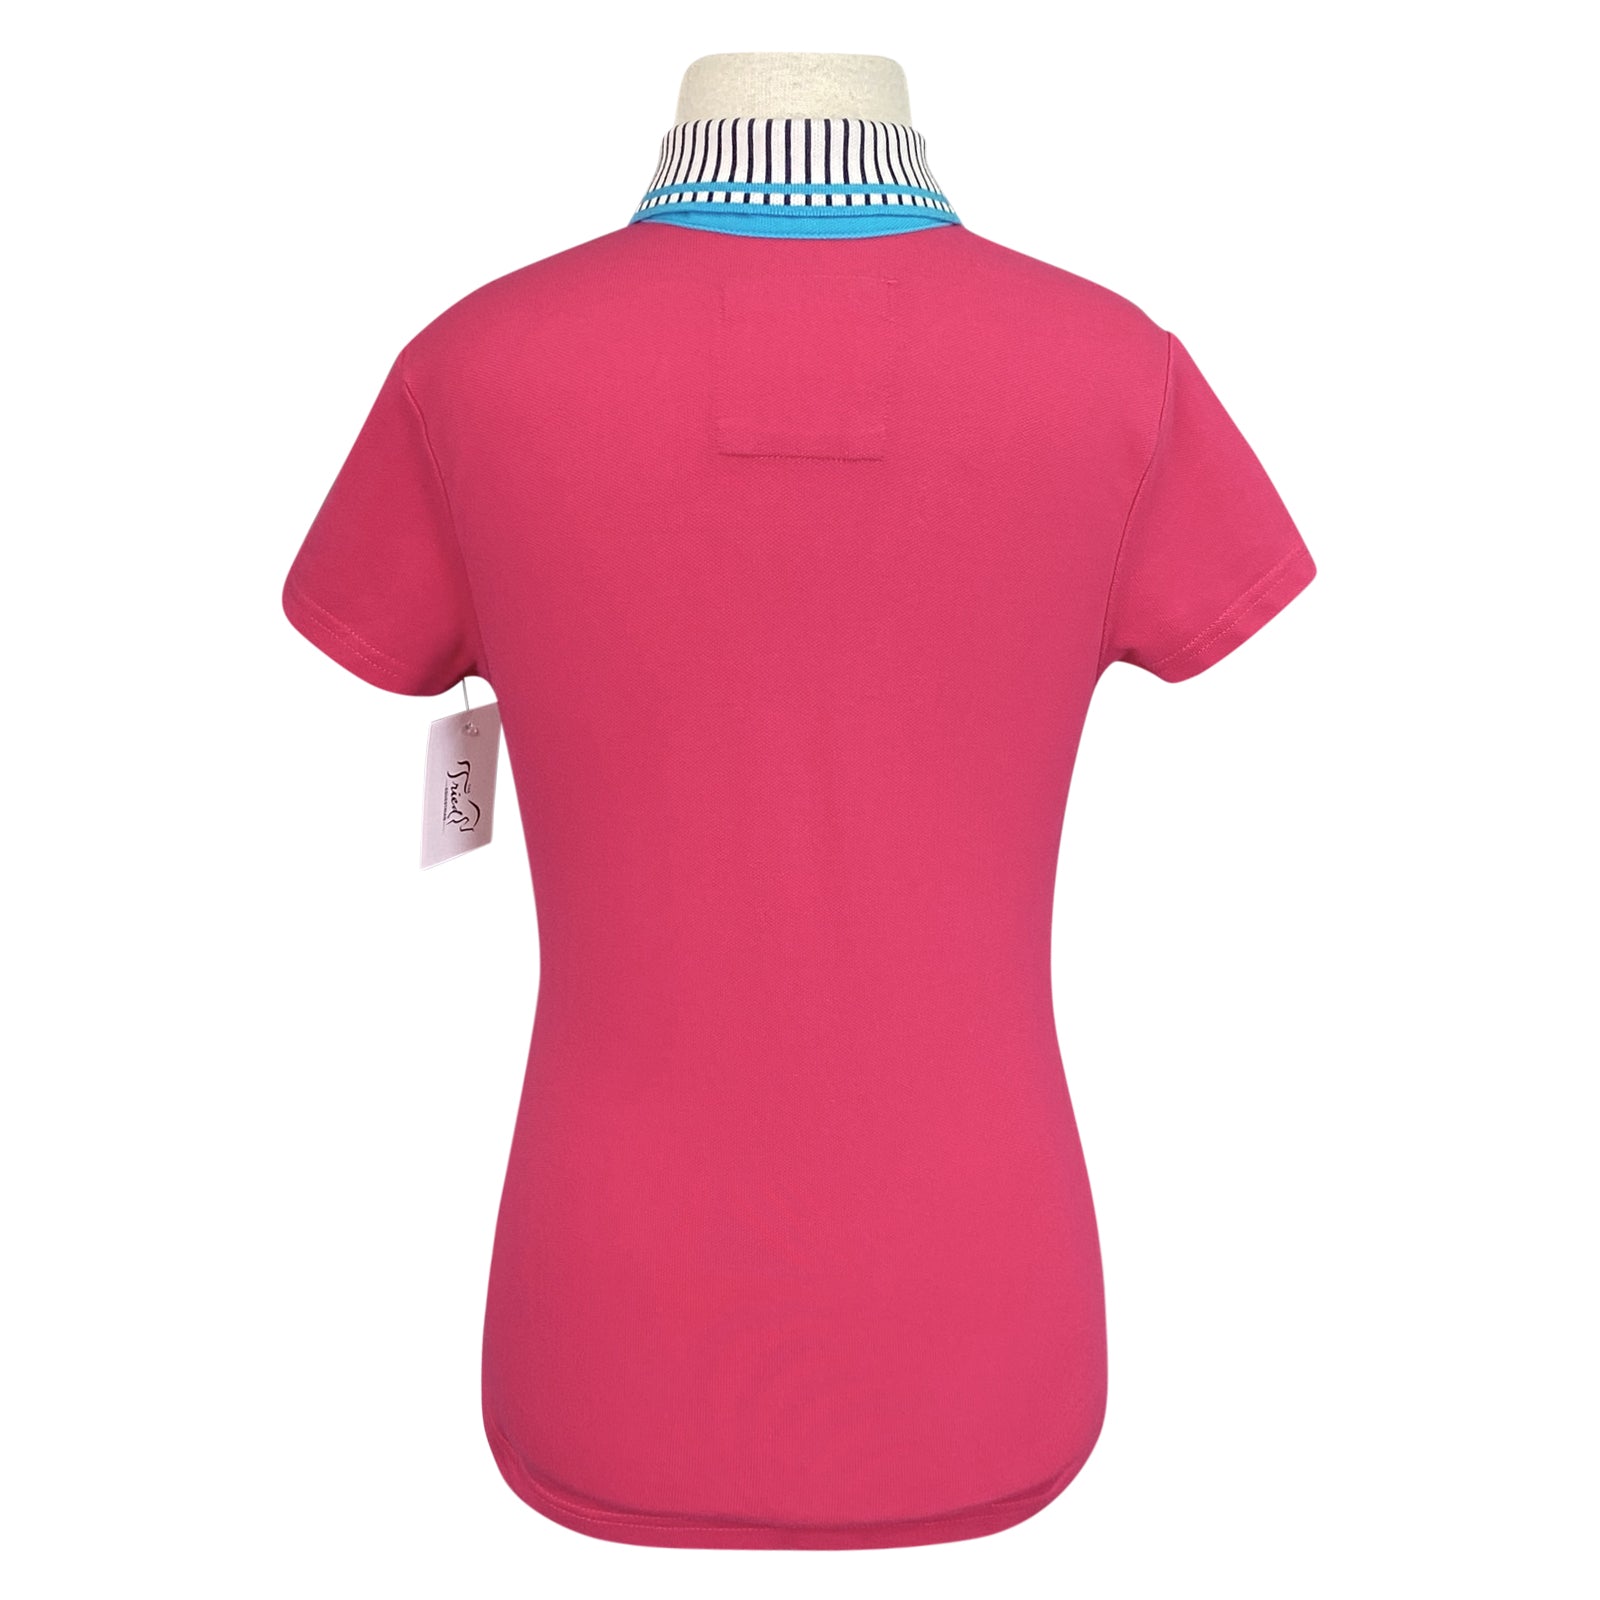 Back fo Ariat Piquet Team Polo in Pink/Stripes